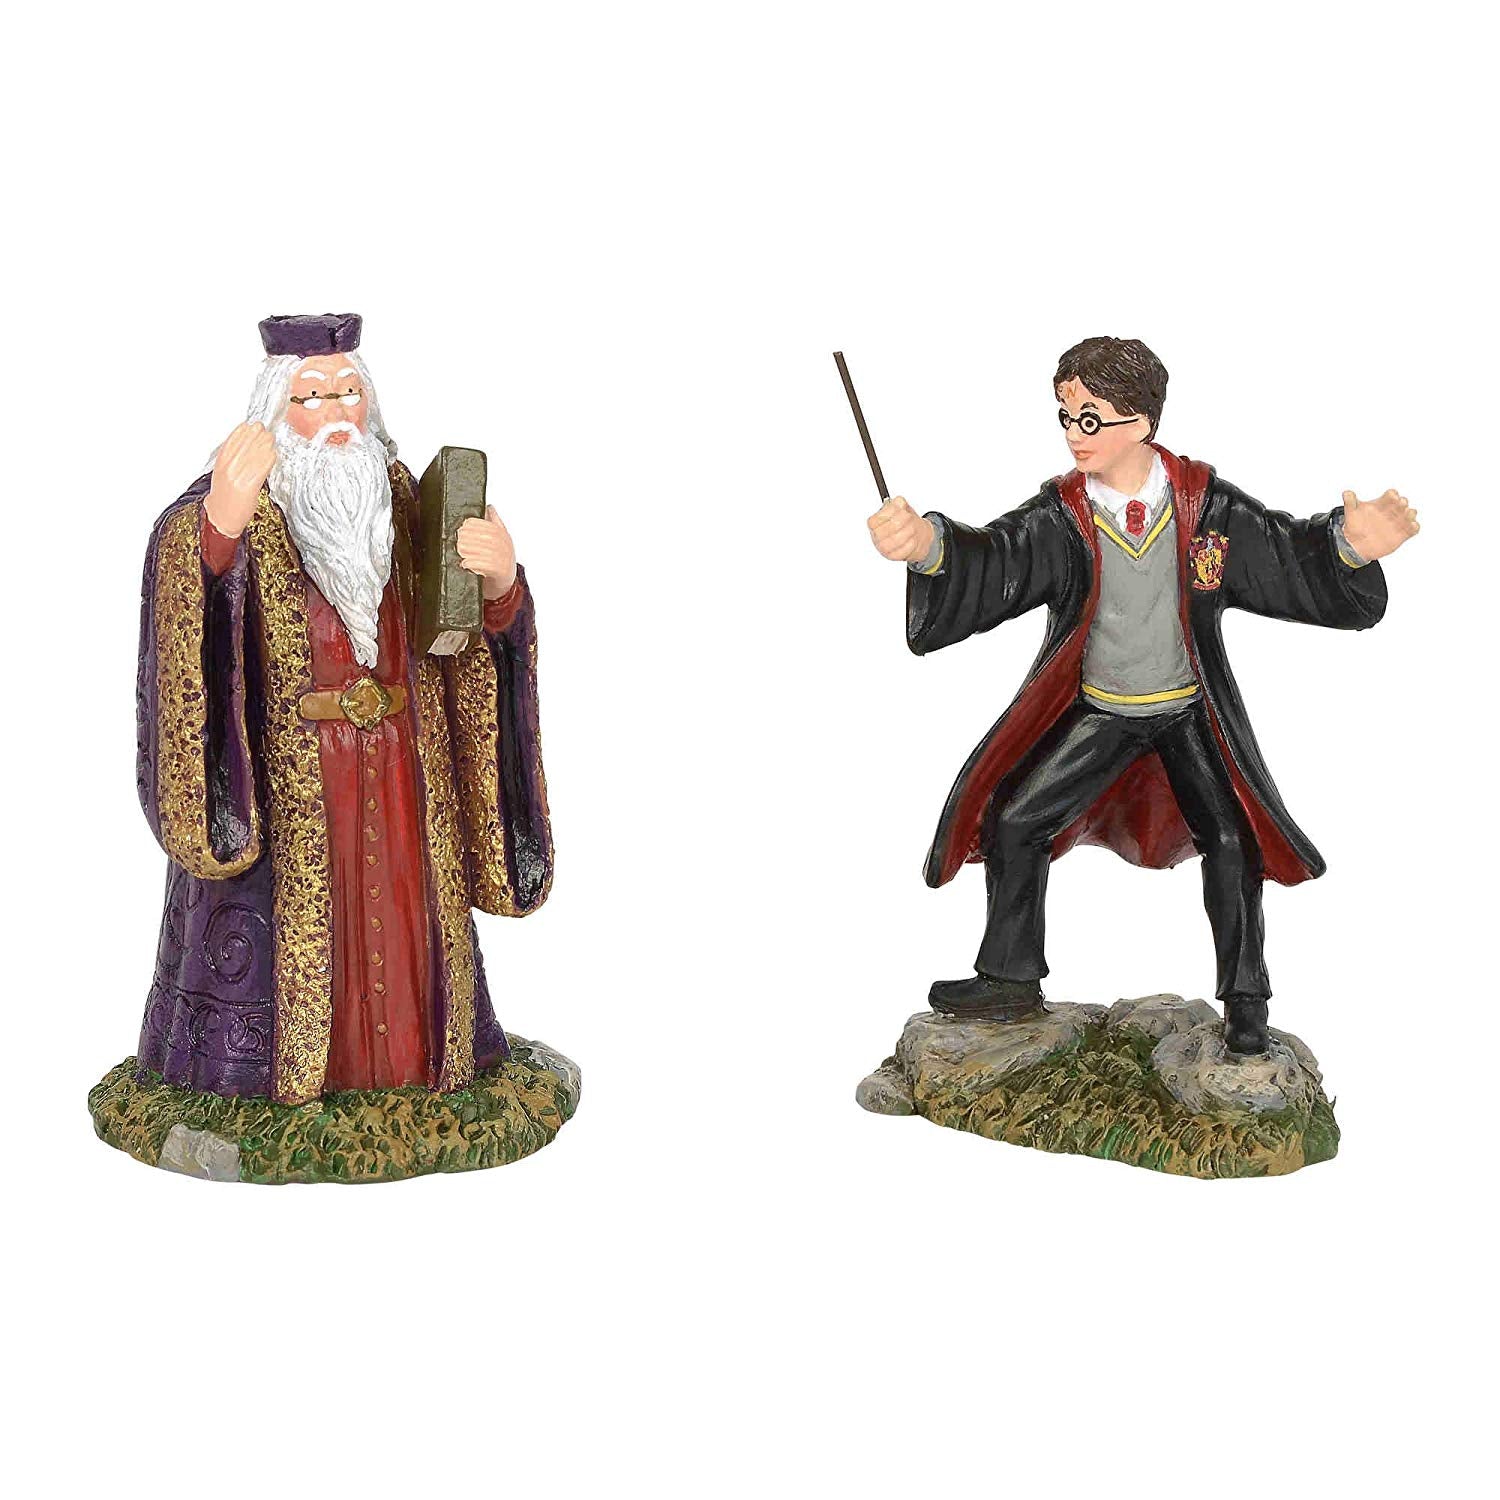 Department 56 Harry Potter Village Harry and the Headmaster